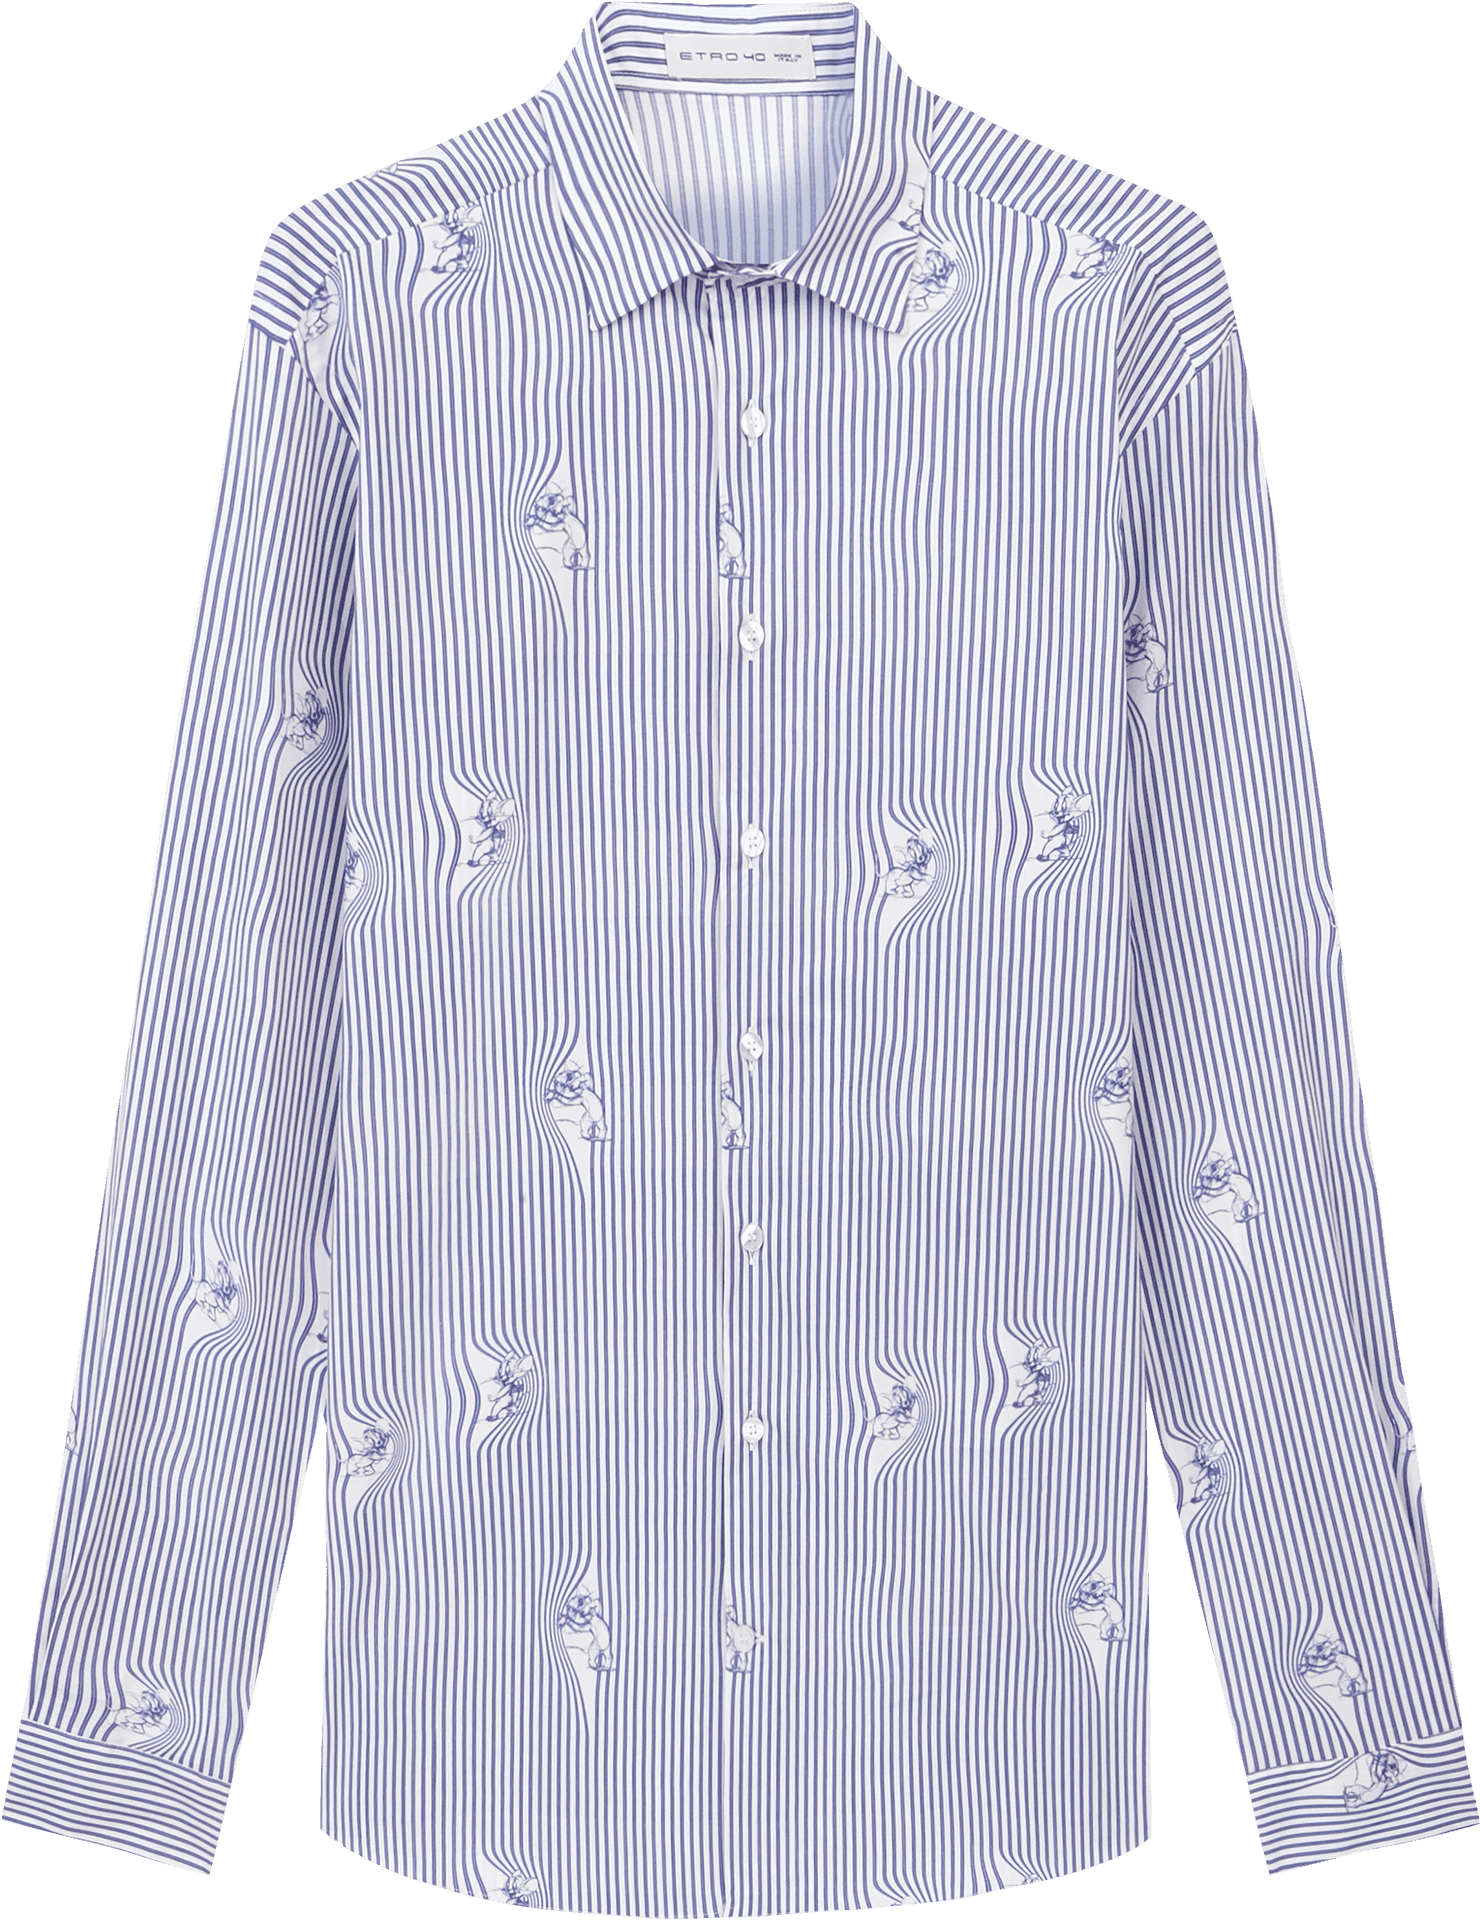 Blue Striped Dress Shirt Product Image PNG